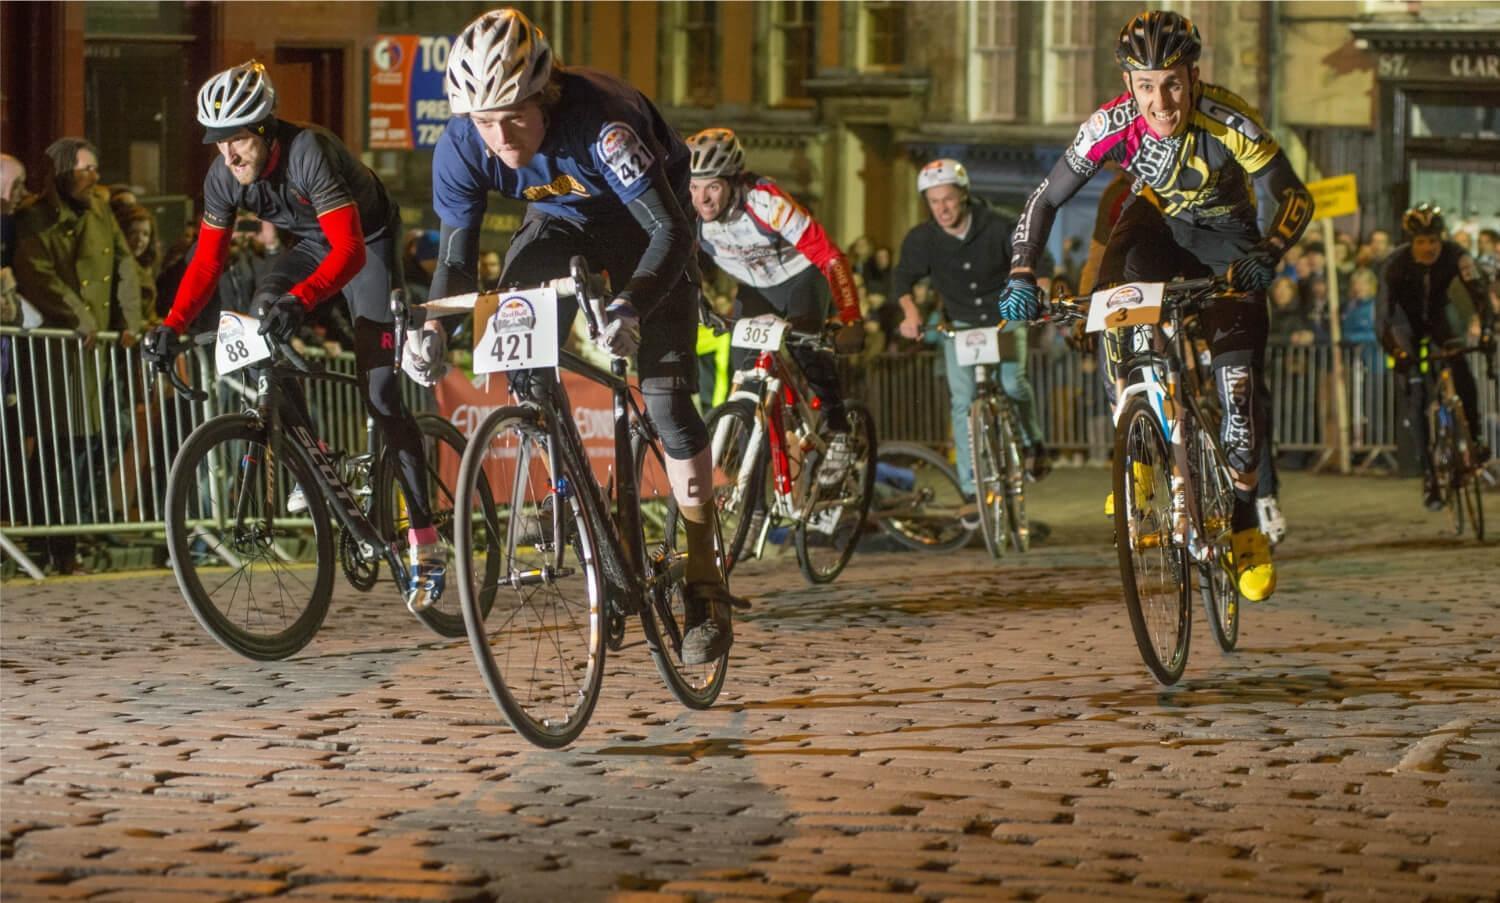 Five participants of Red Bull Hill Chasers event cycling up a cobbled street in Edinburgh with spectators on either side of the road behind metal barriers.